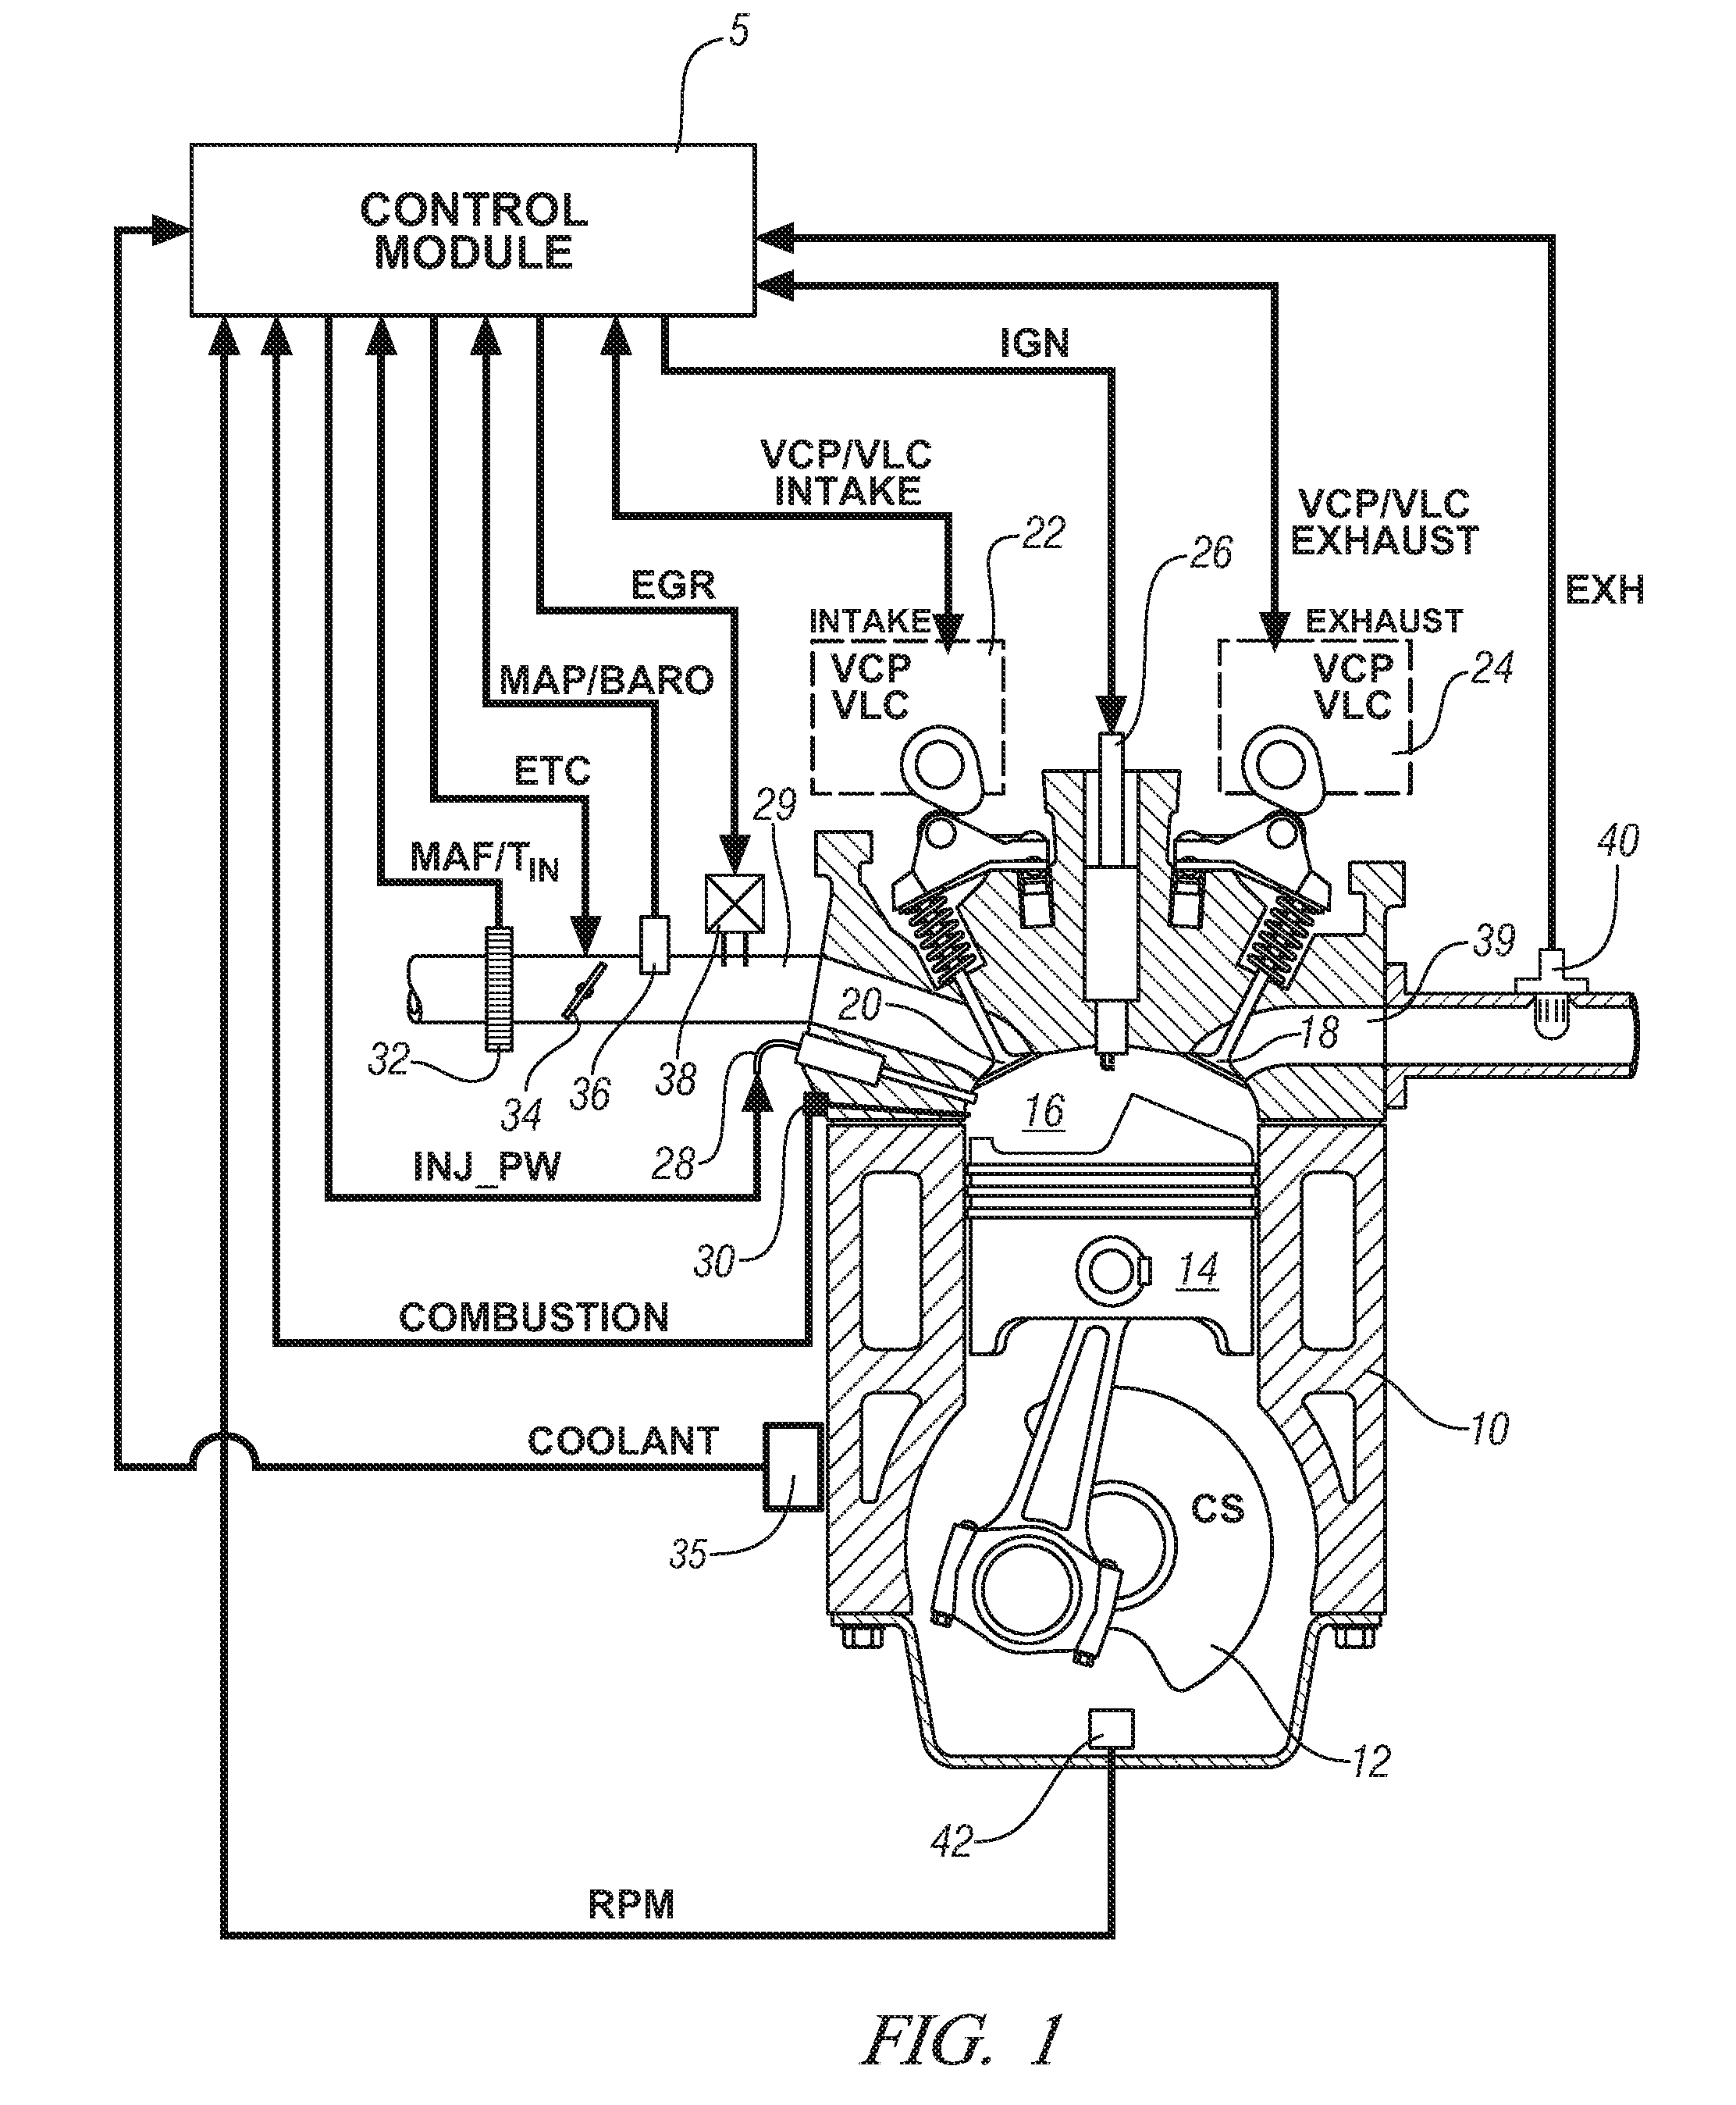 Method and apparatus for engine control during auto-ignition combustion